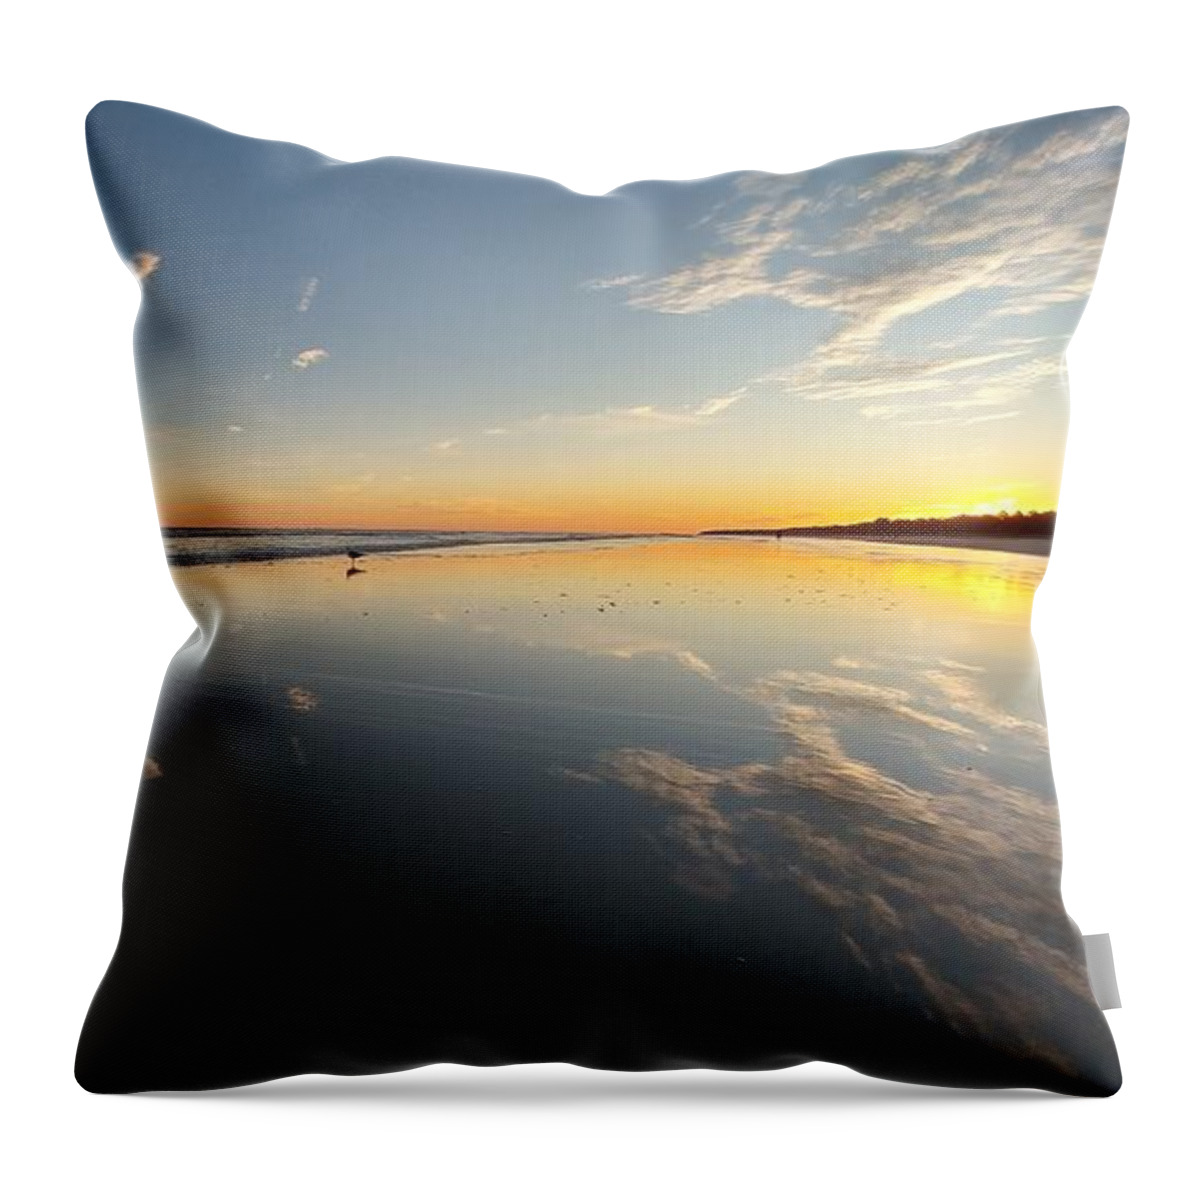 Ocean Reflections Throw Pillow featuring the photograph Ocean Reflections by Jennifer Forsyth